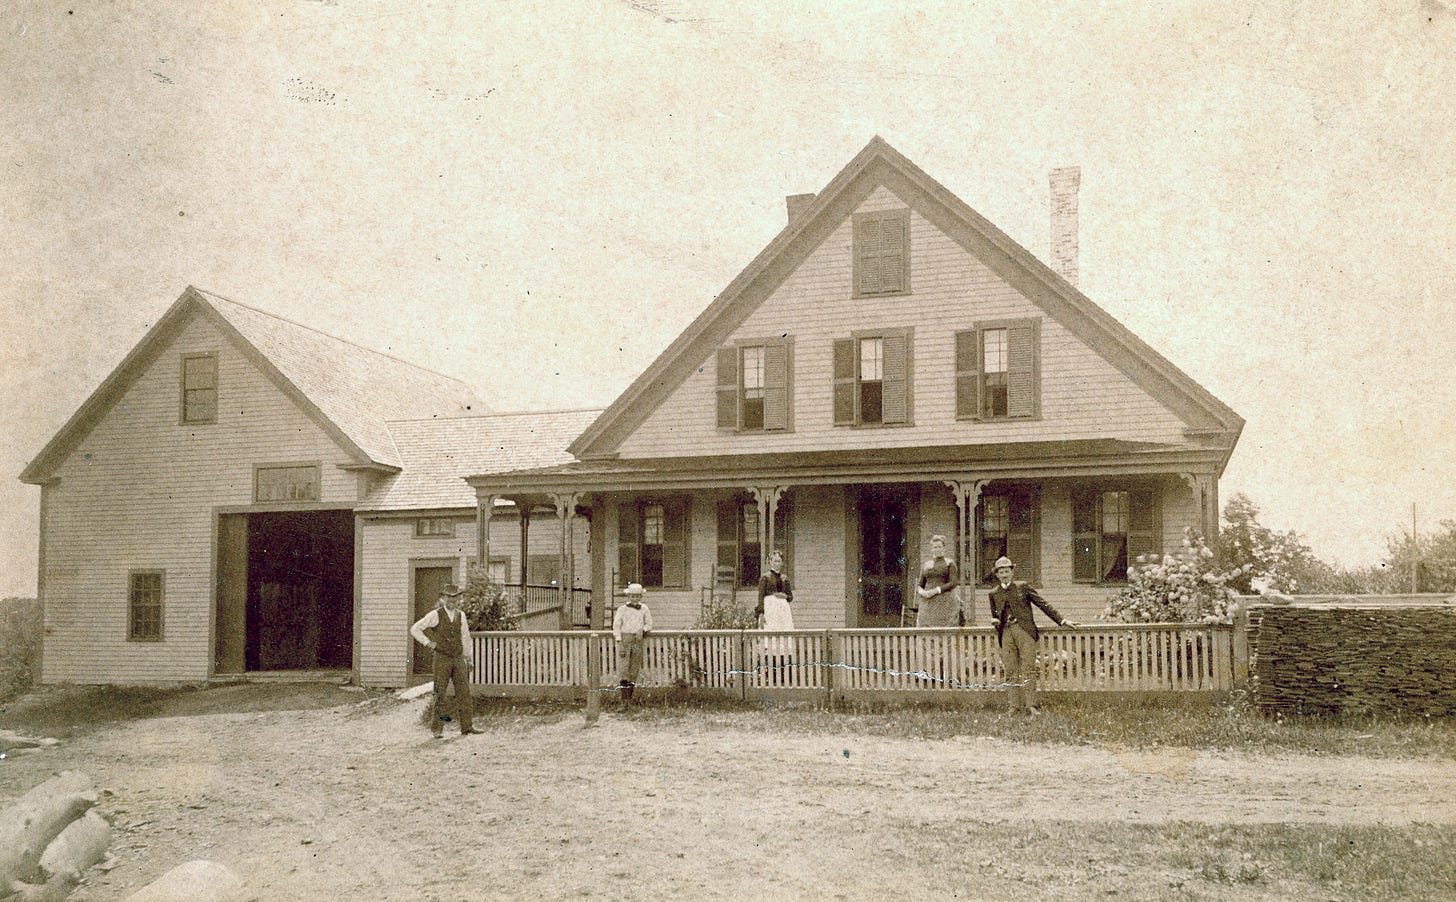 Four people in front of house and barn